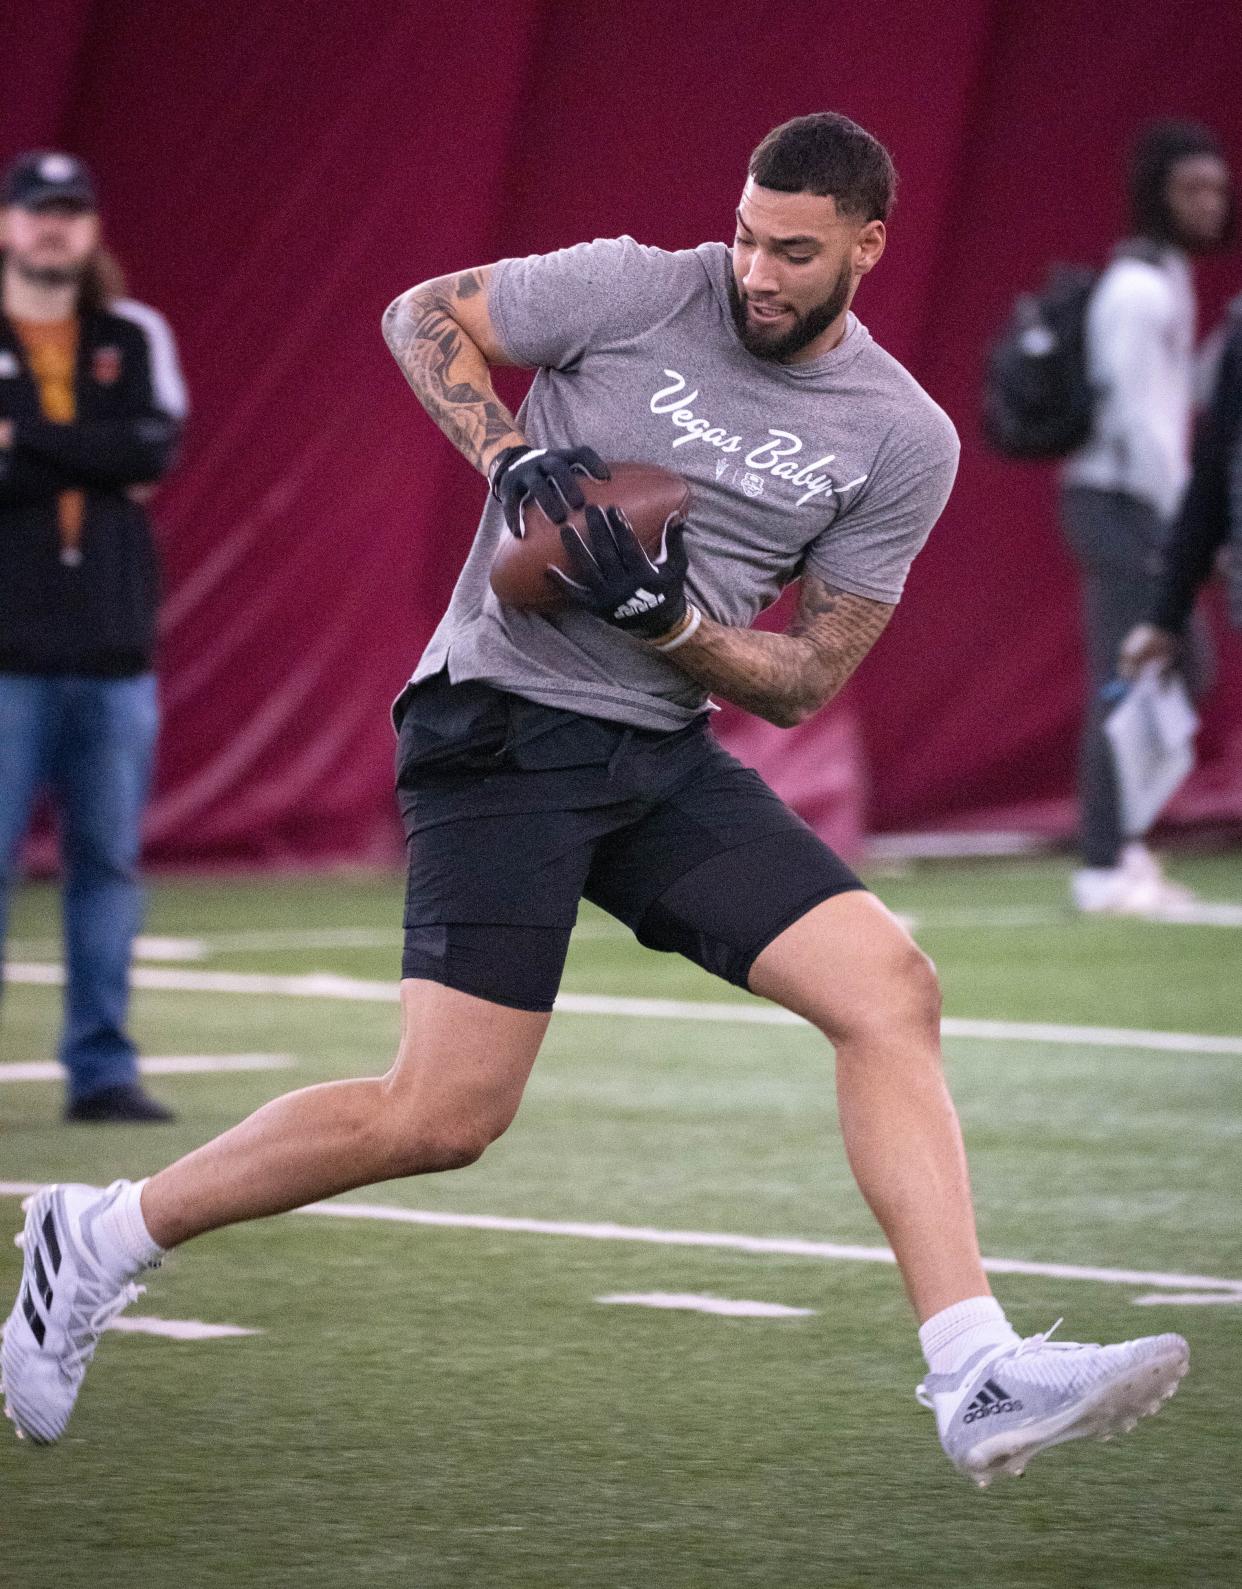 Curtis Hodges catches a pass during Pro Day, March 14, 2022, at ASU, Tempe, Arizona.